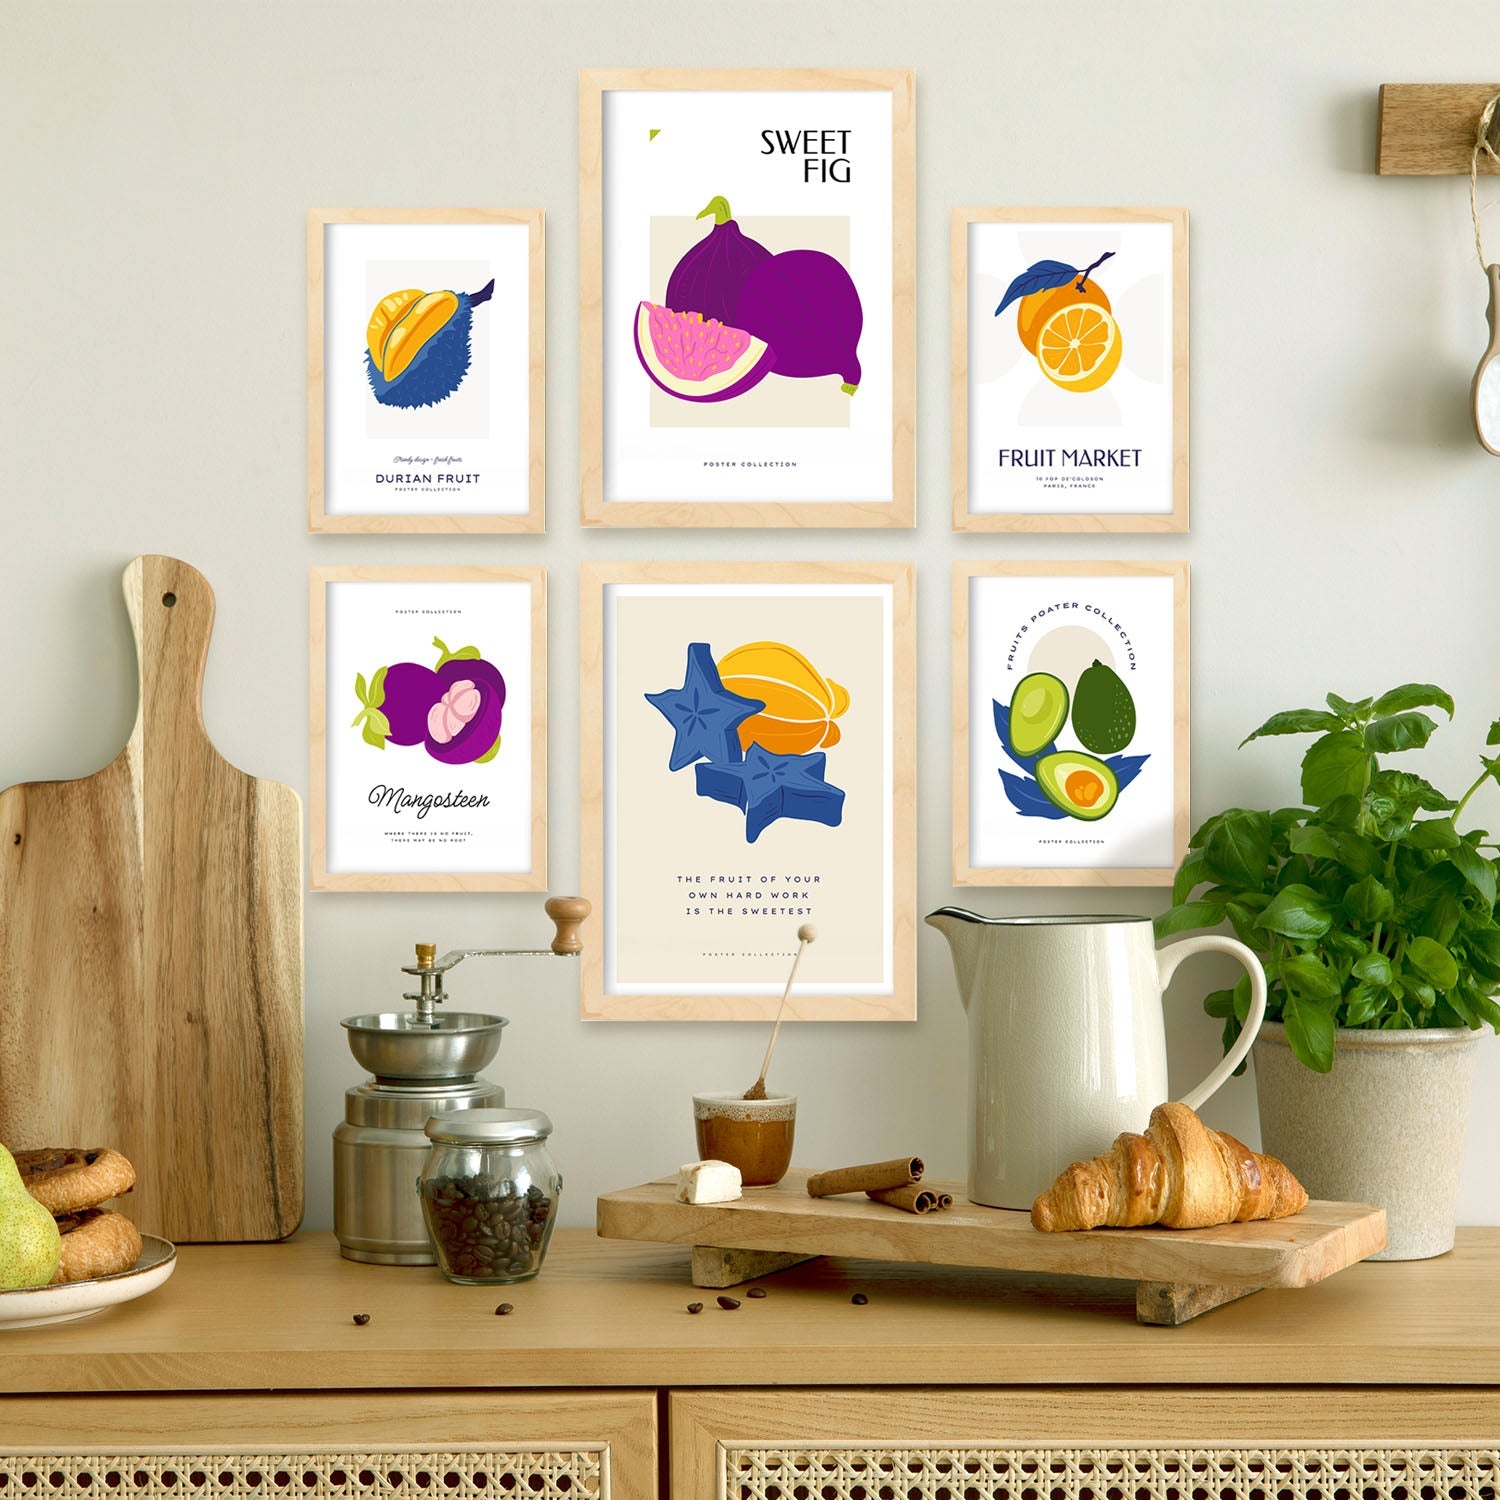 Food and Plants Posters. Fruit Collage. Nature and Botany-Artwork-Nacnic-Nacnic Estudio SL